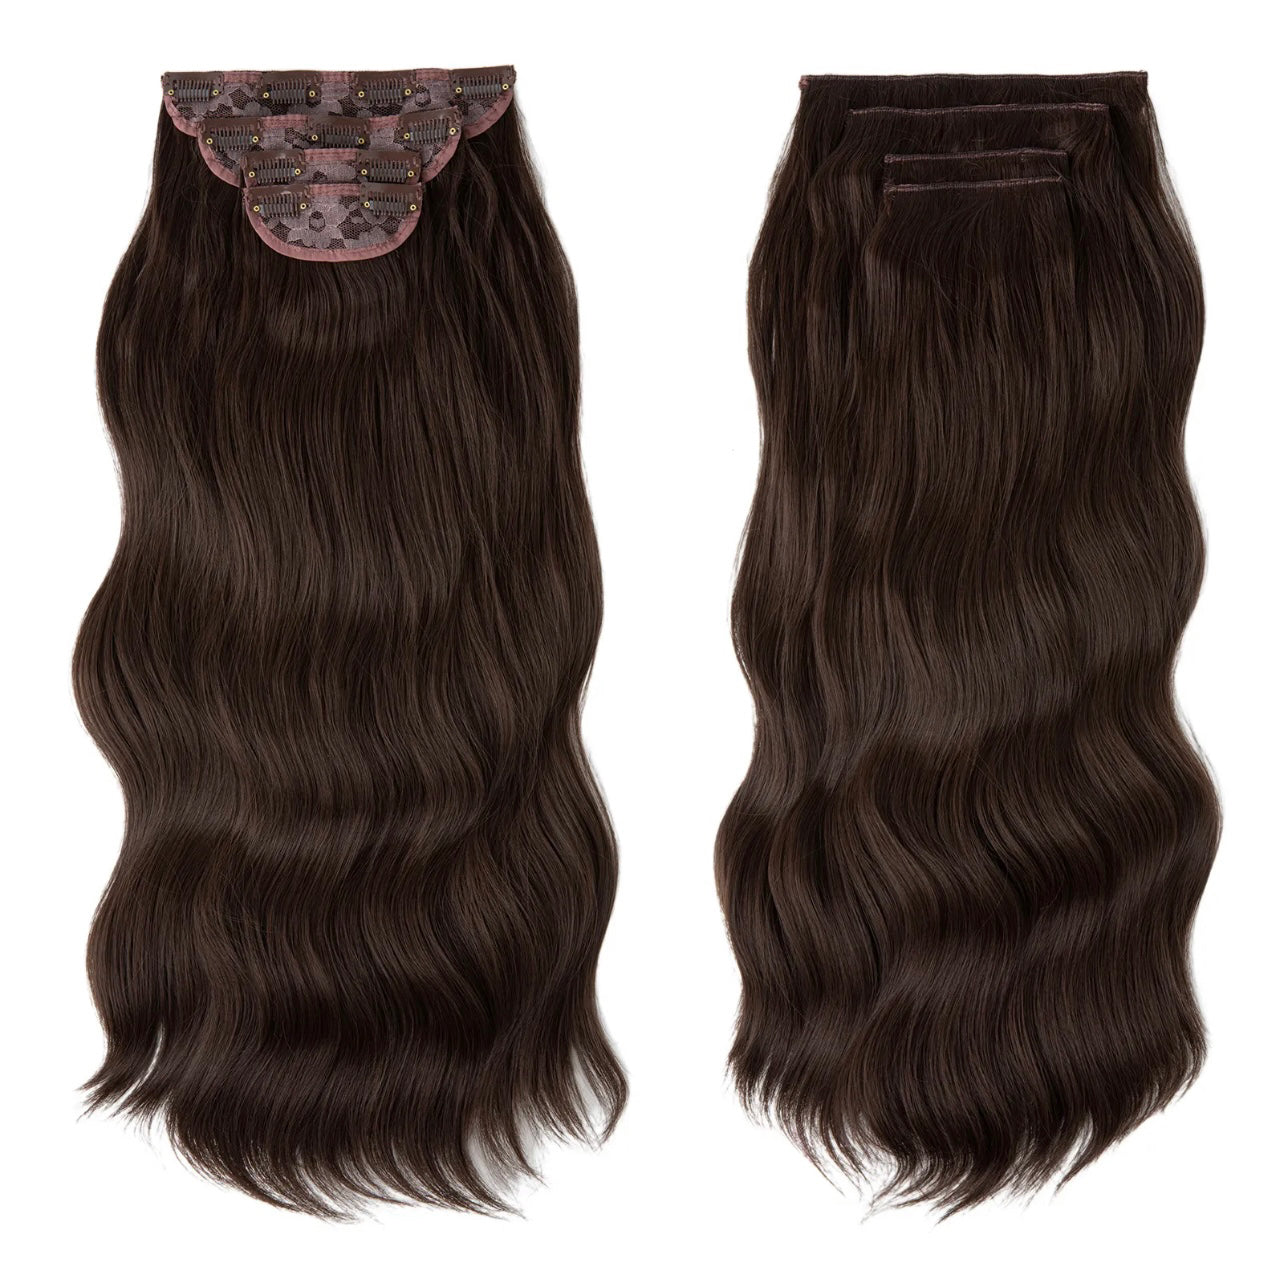 4 BROWN - SUPER THICK 22” 4 PIECE WAIST Length WAVE CLIPS IN HAIR Extensions